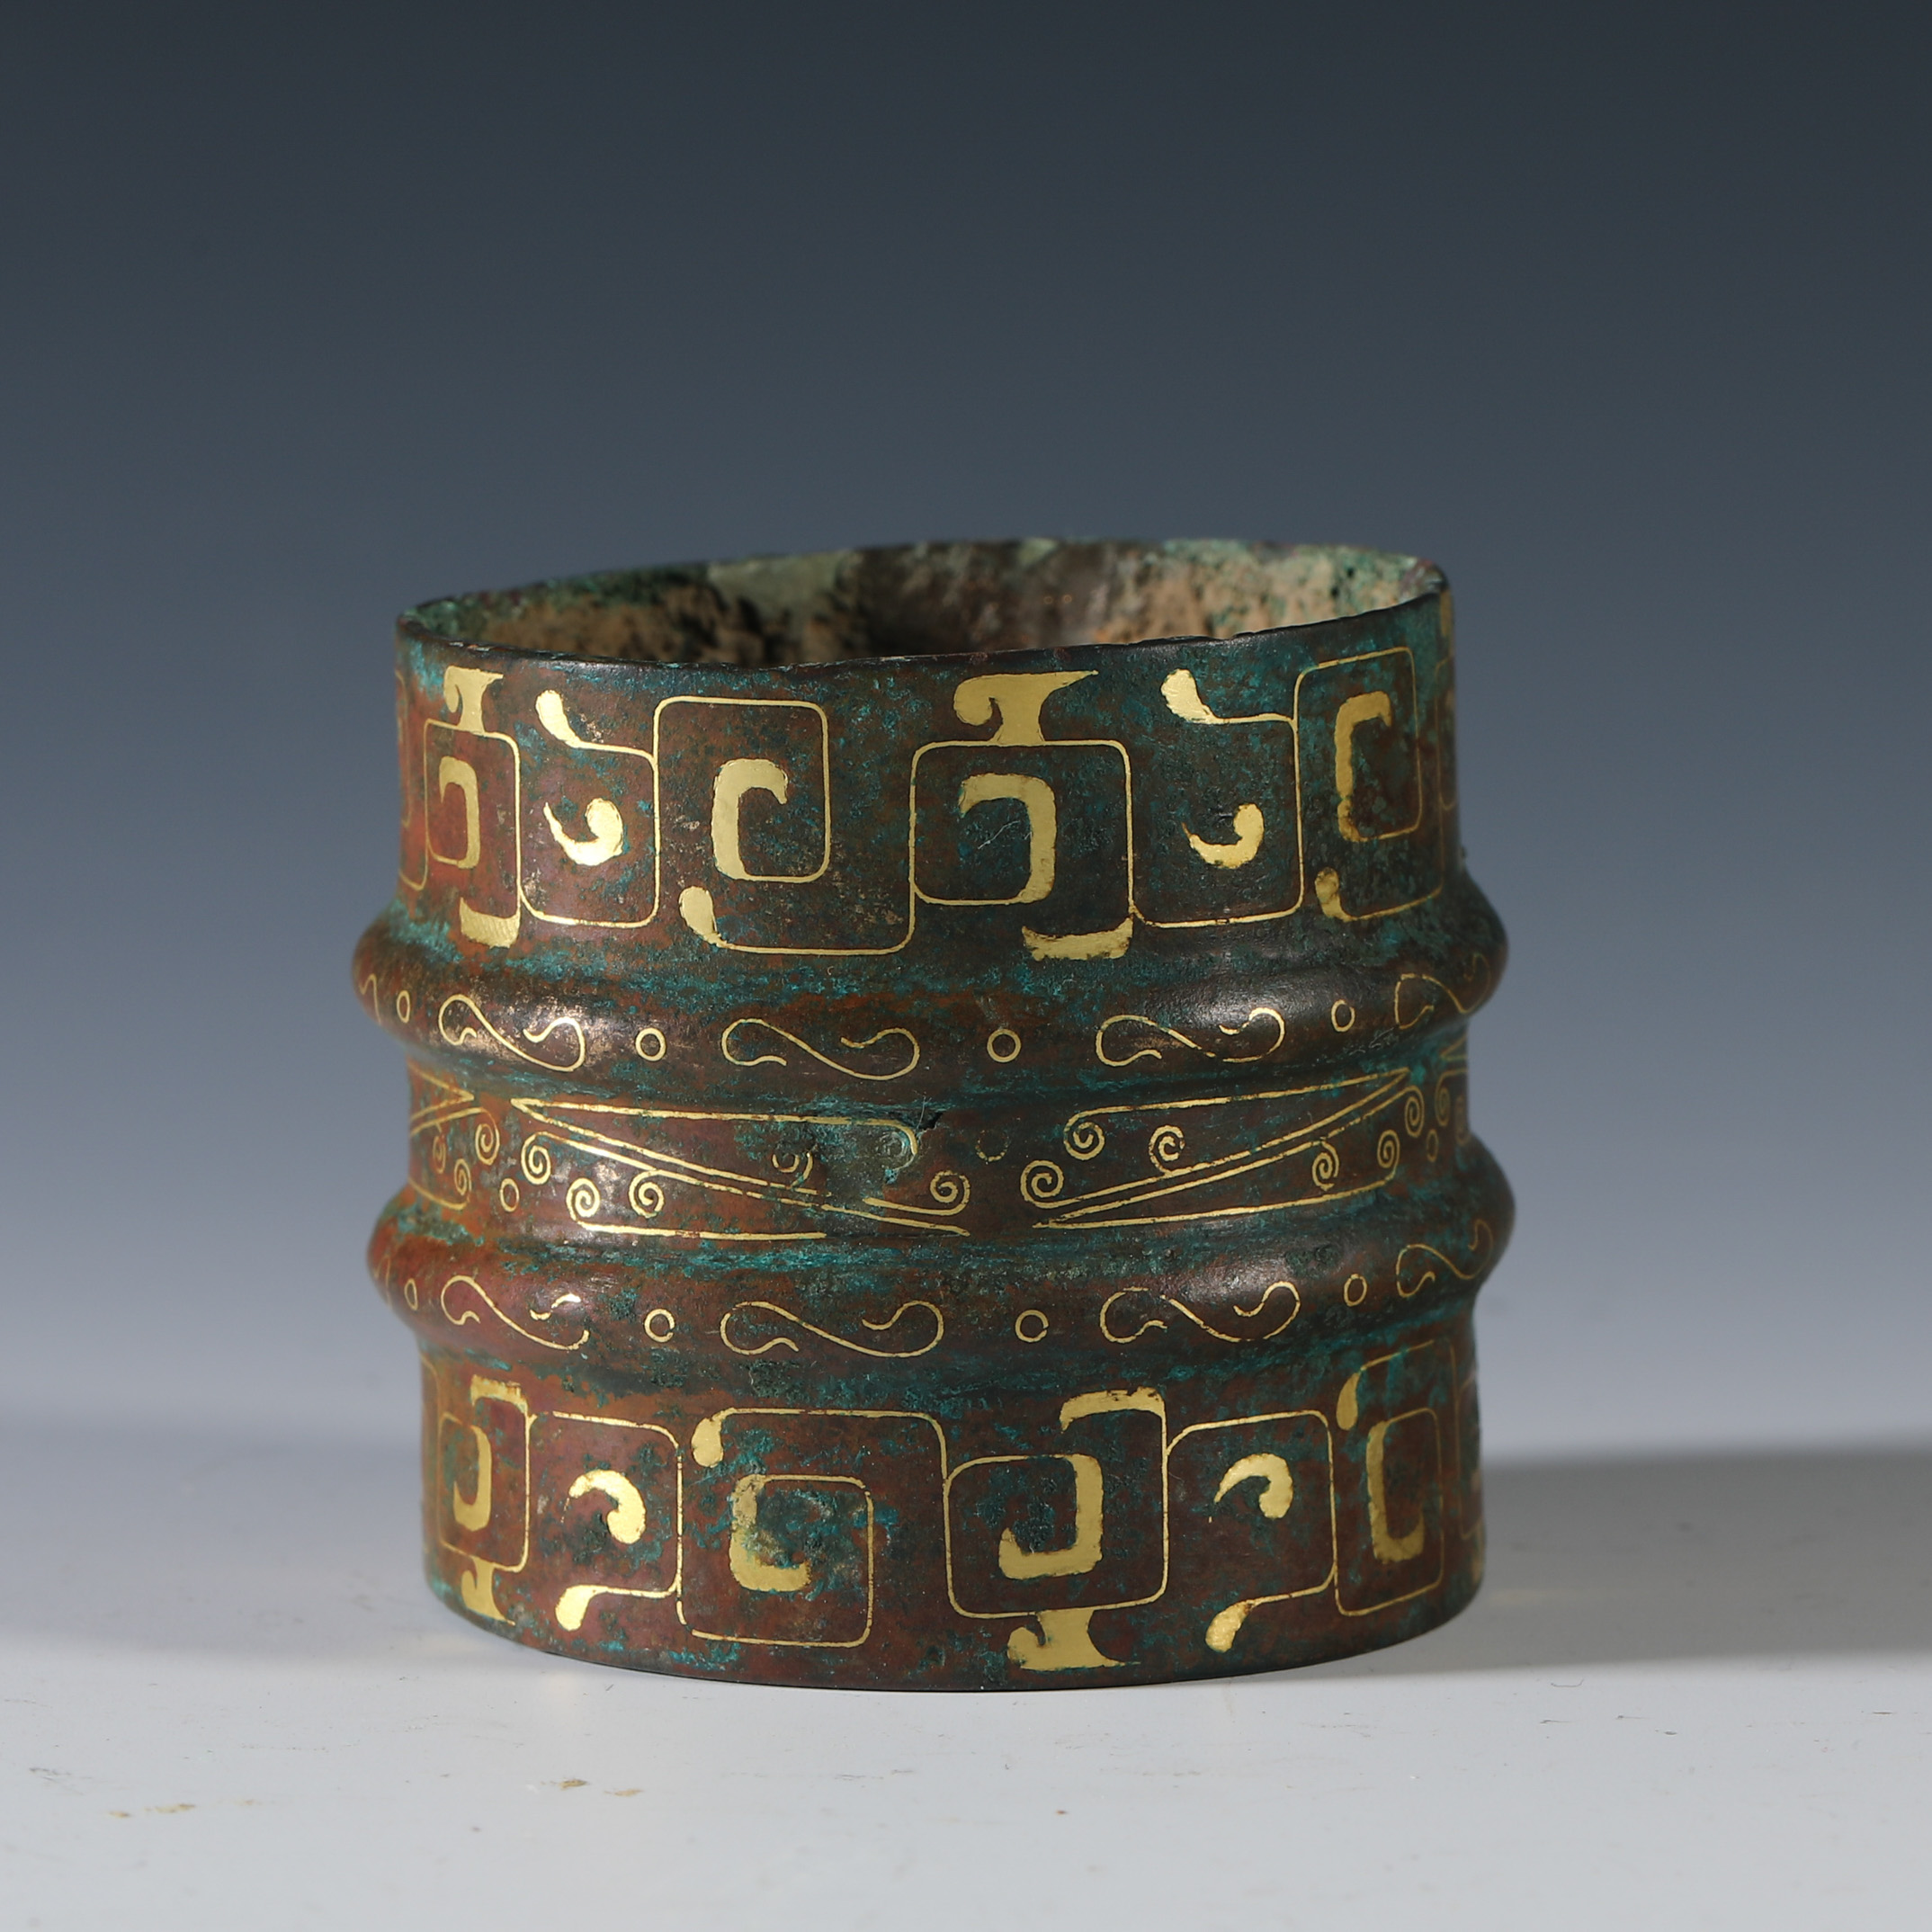 A group of copper and gold components  from the Han dynasty  - Image 3 of 7